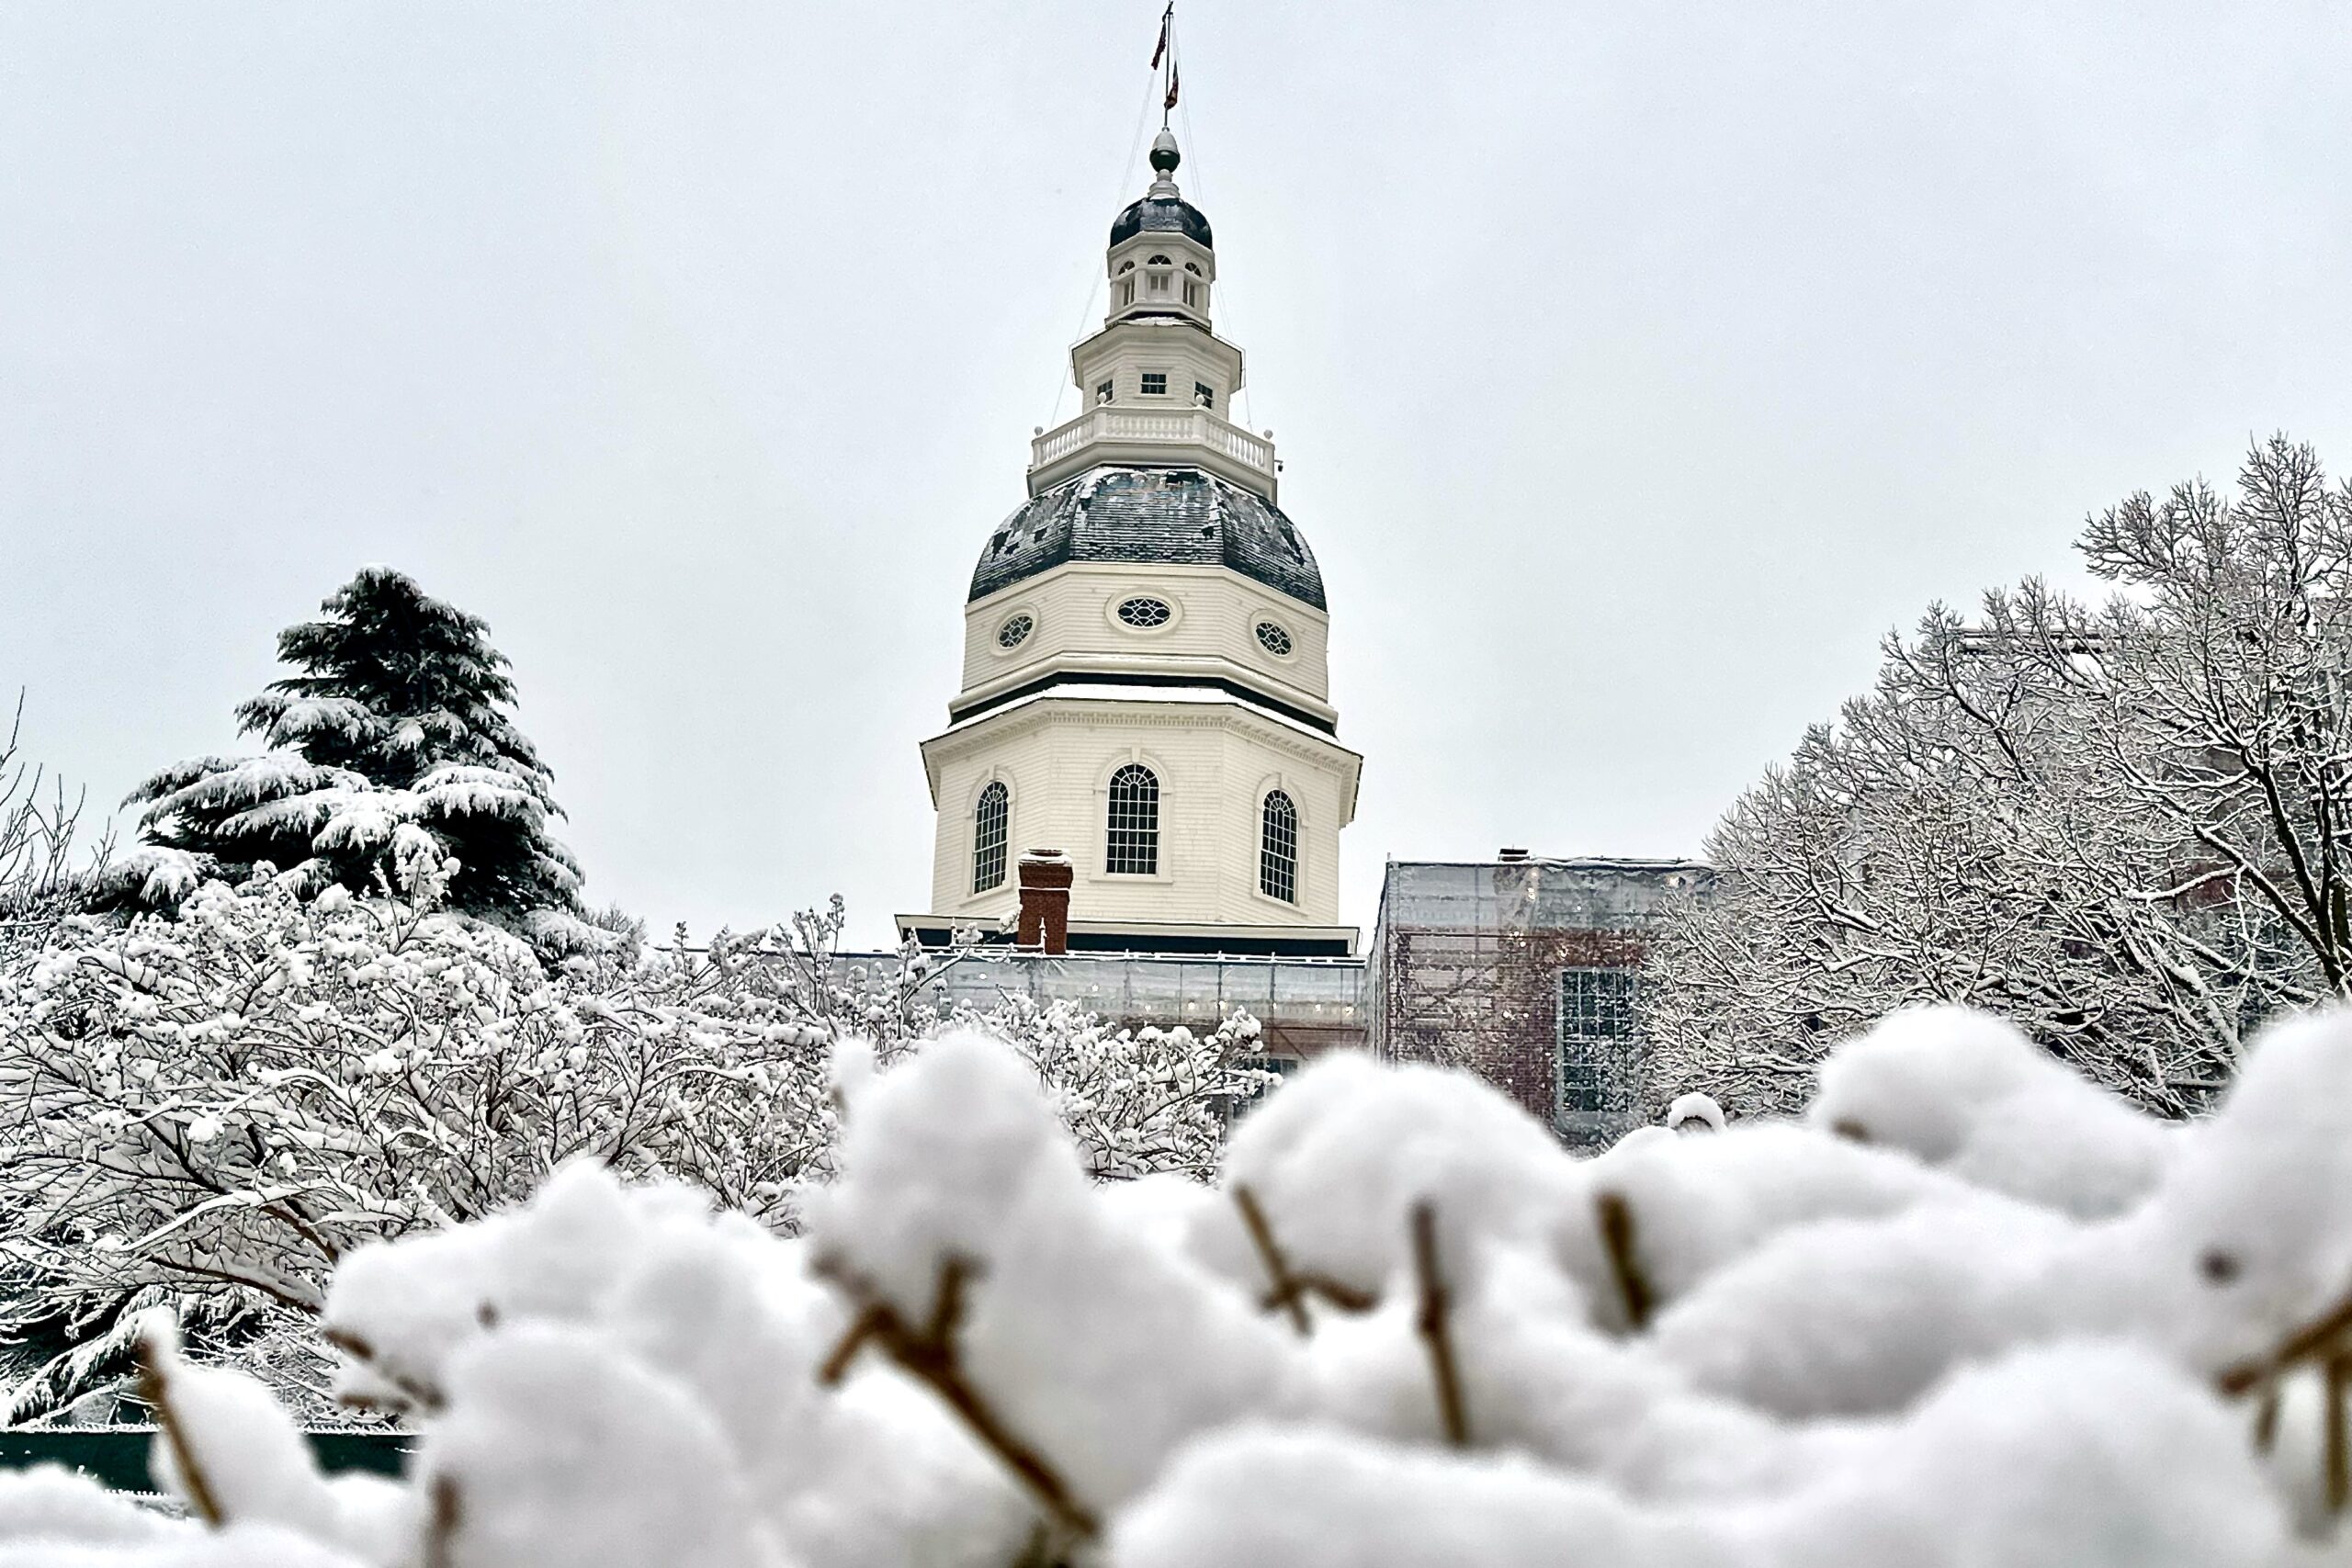 Maryland's iconic State House dome and grounds blanketed in newly fallen snow.